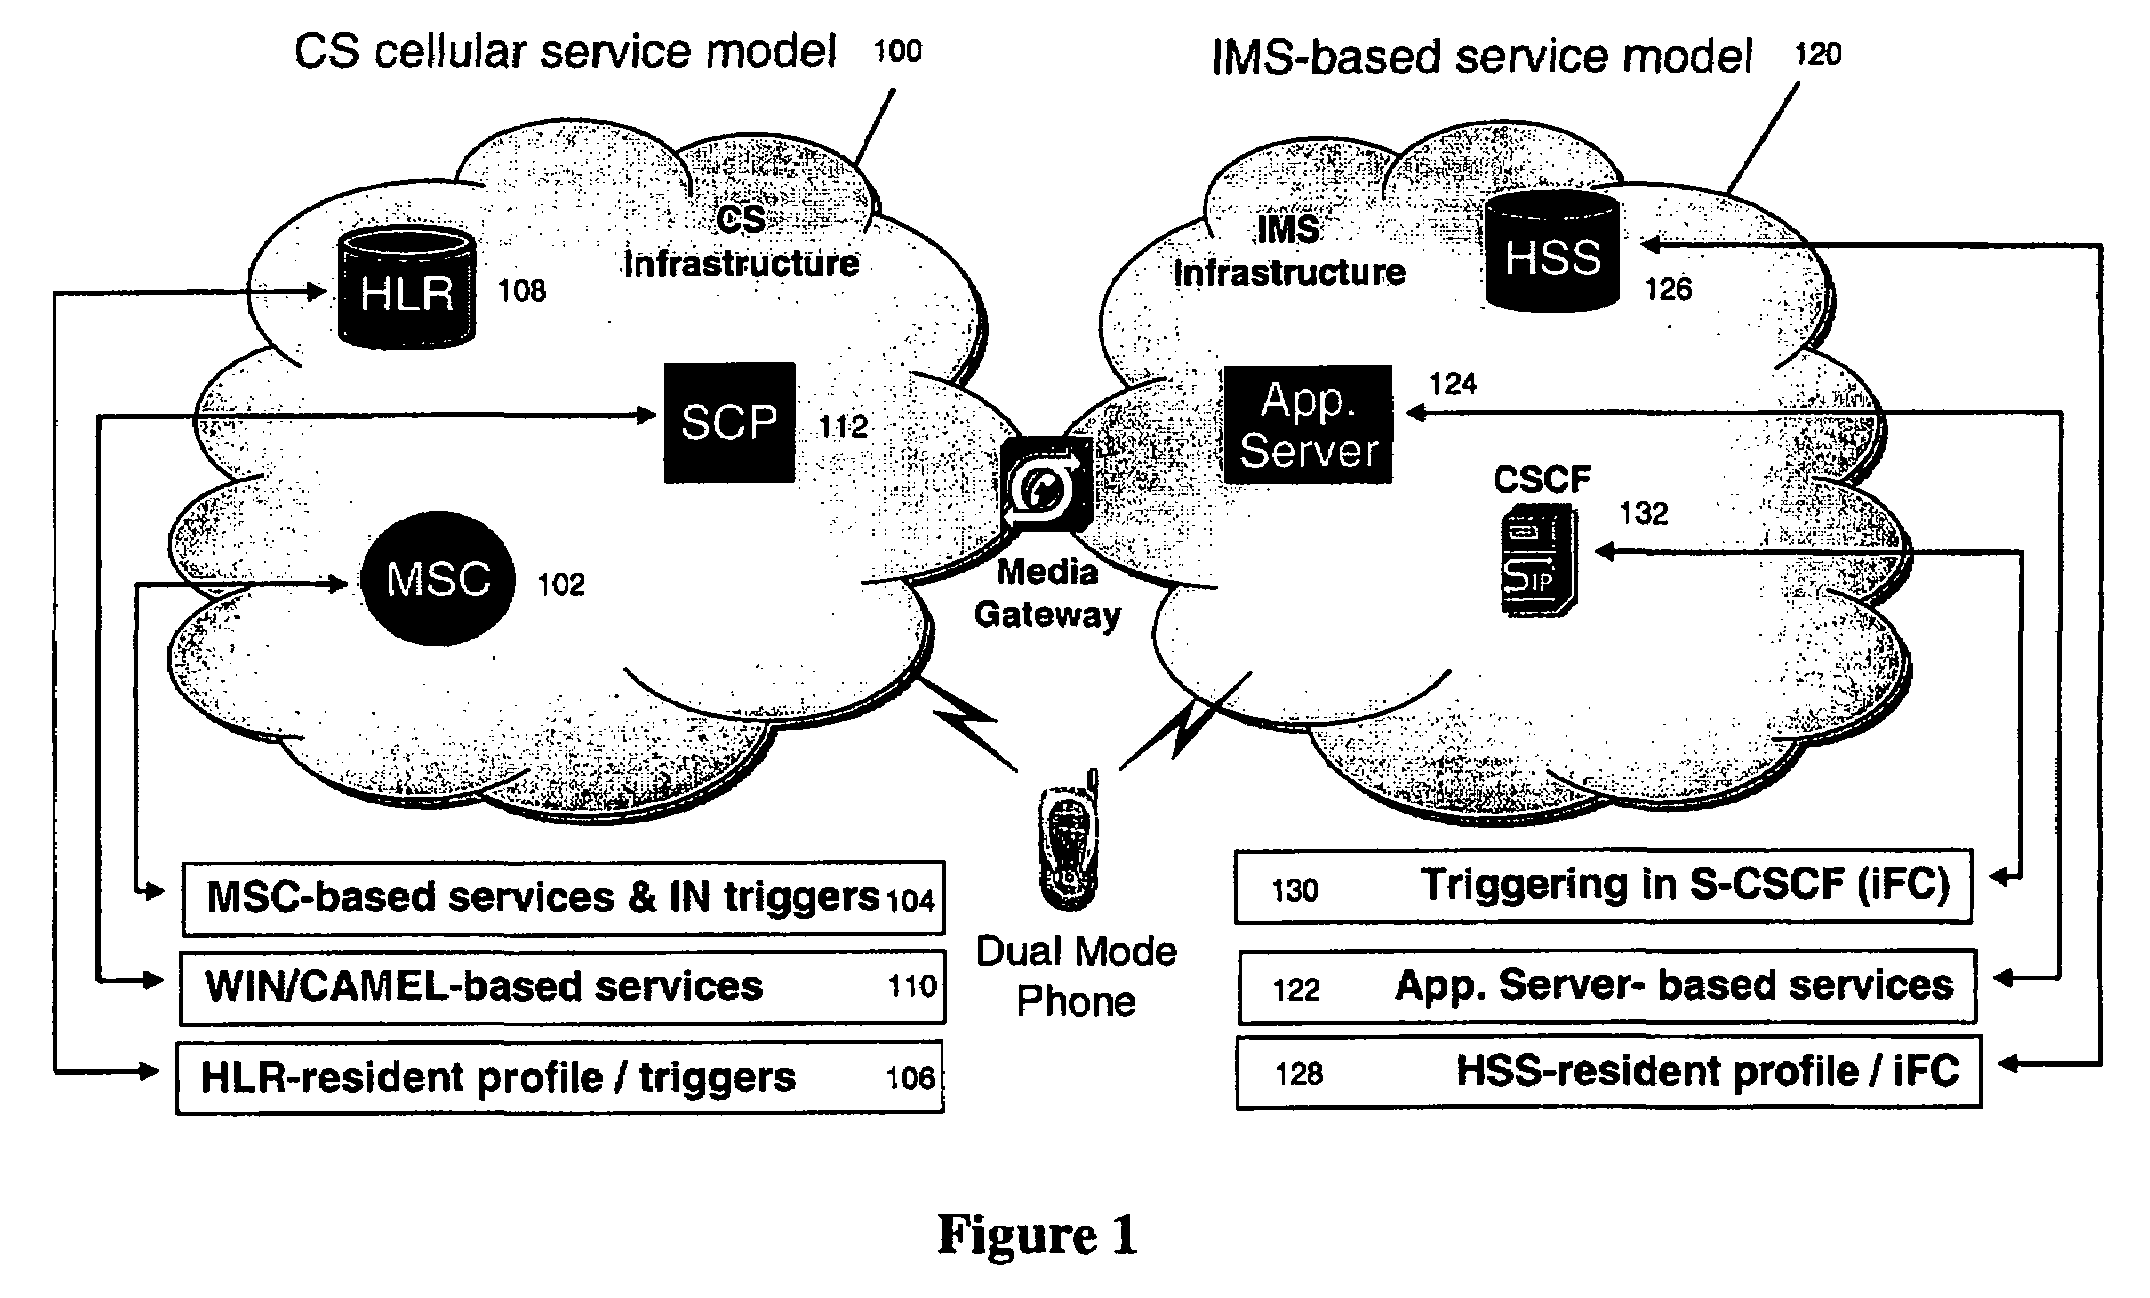 Wireless intelligent network (WIN) support for centralized service control in an IP multimedia subsystem (IMS) network